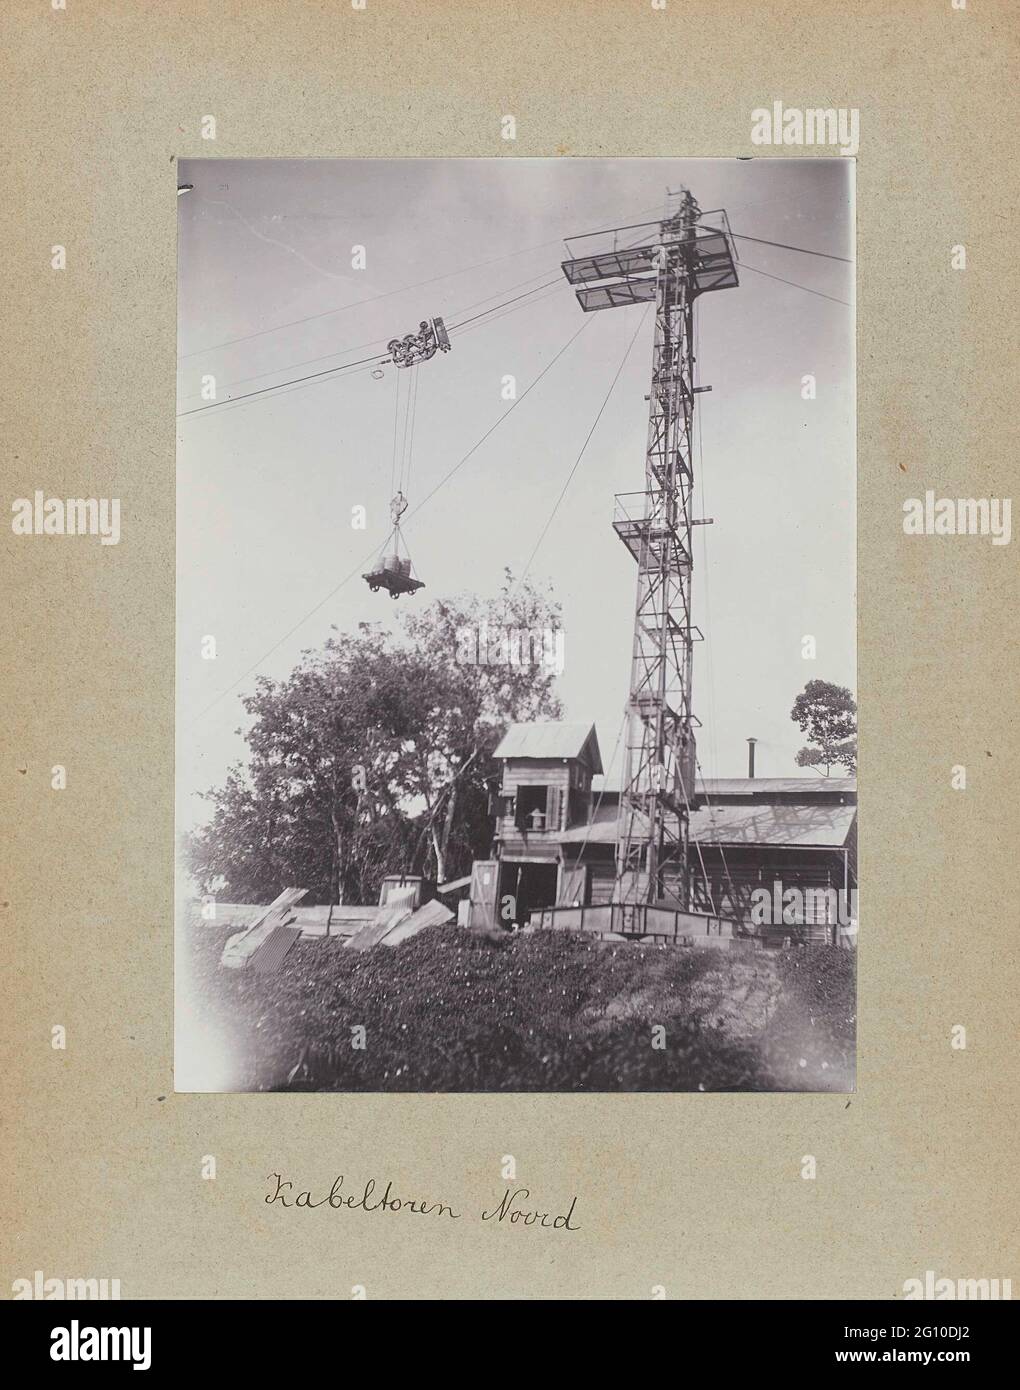 Cable tower Noord. The cable tower on the north side of the surinamer river. Photo in the photo album about the construction of the Lawaspoor road in Suriname in the years 1903-1912. Part of a group of objects from the Wesenhagen family in Suriname. Stock Photo